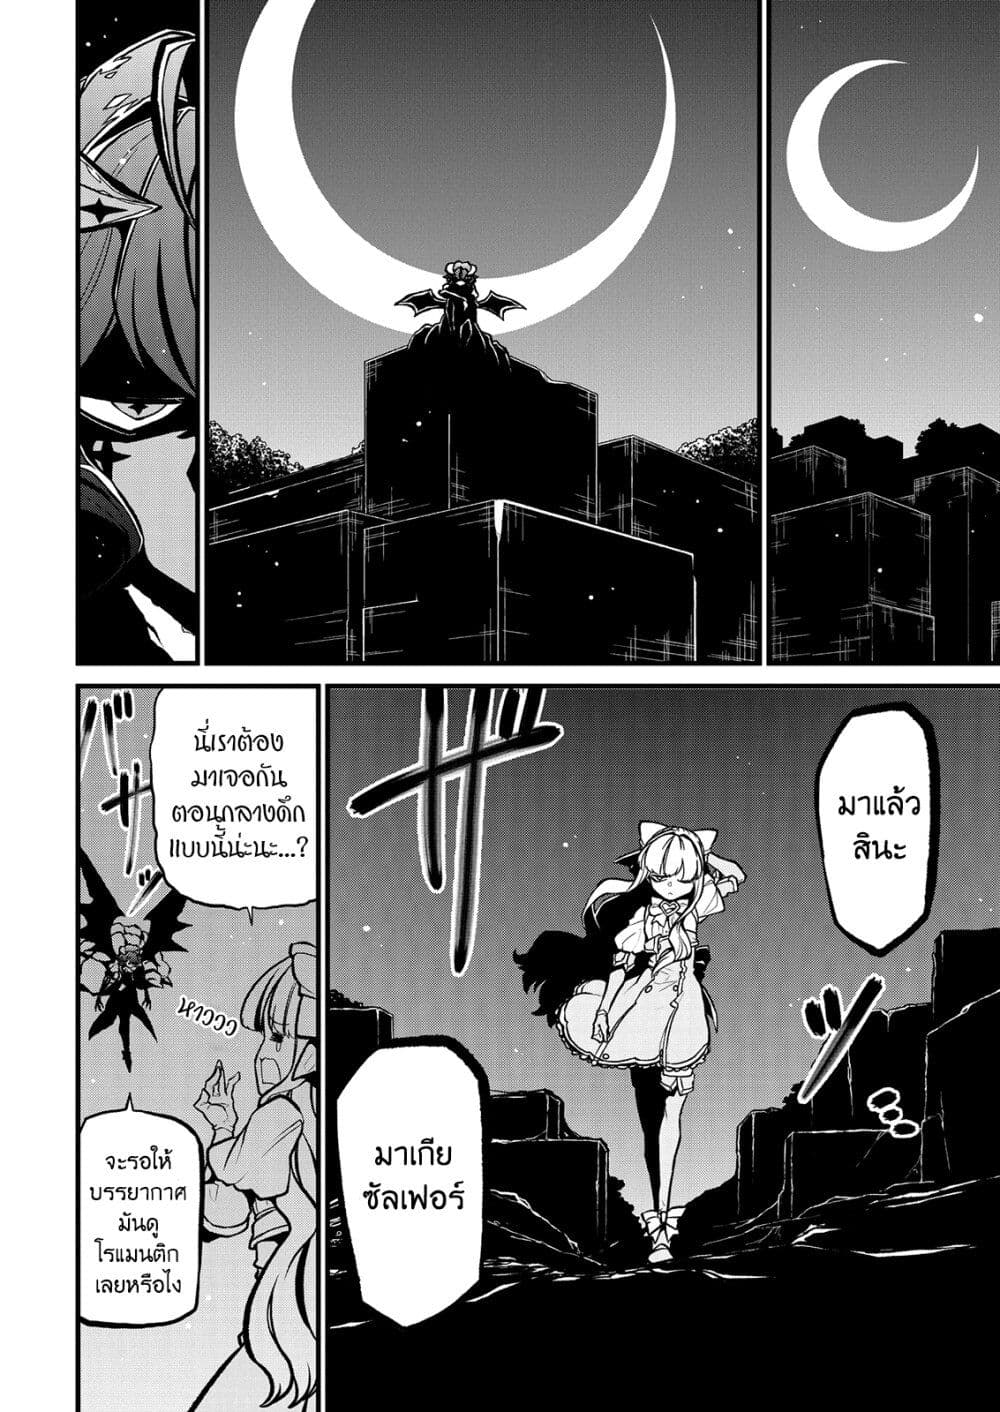 Looking up to Magical Girls 30 (8)